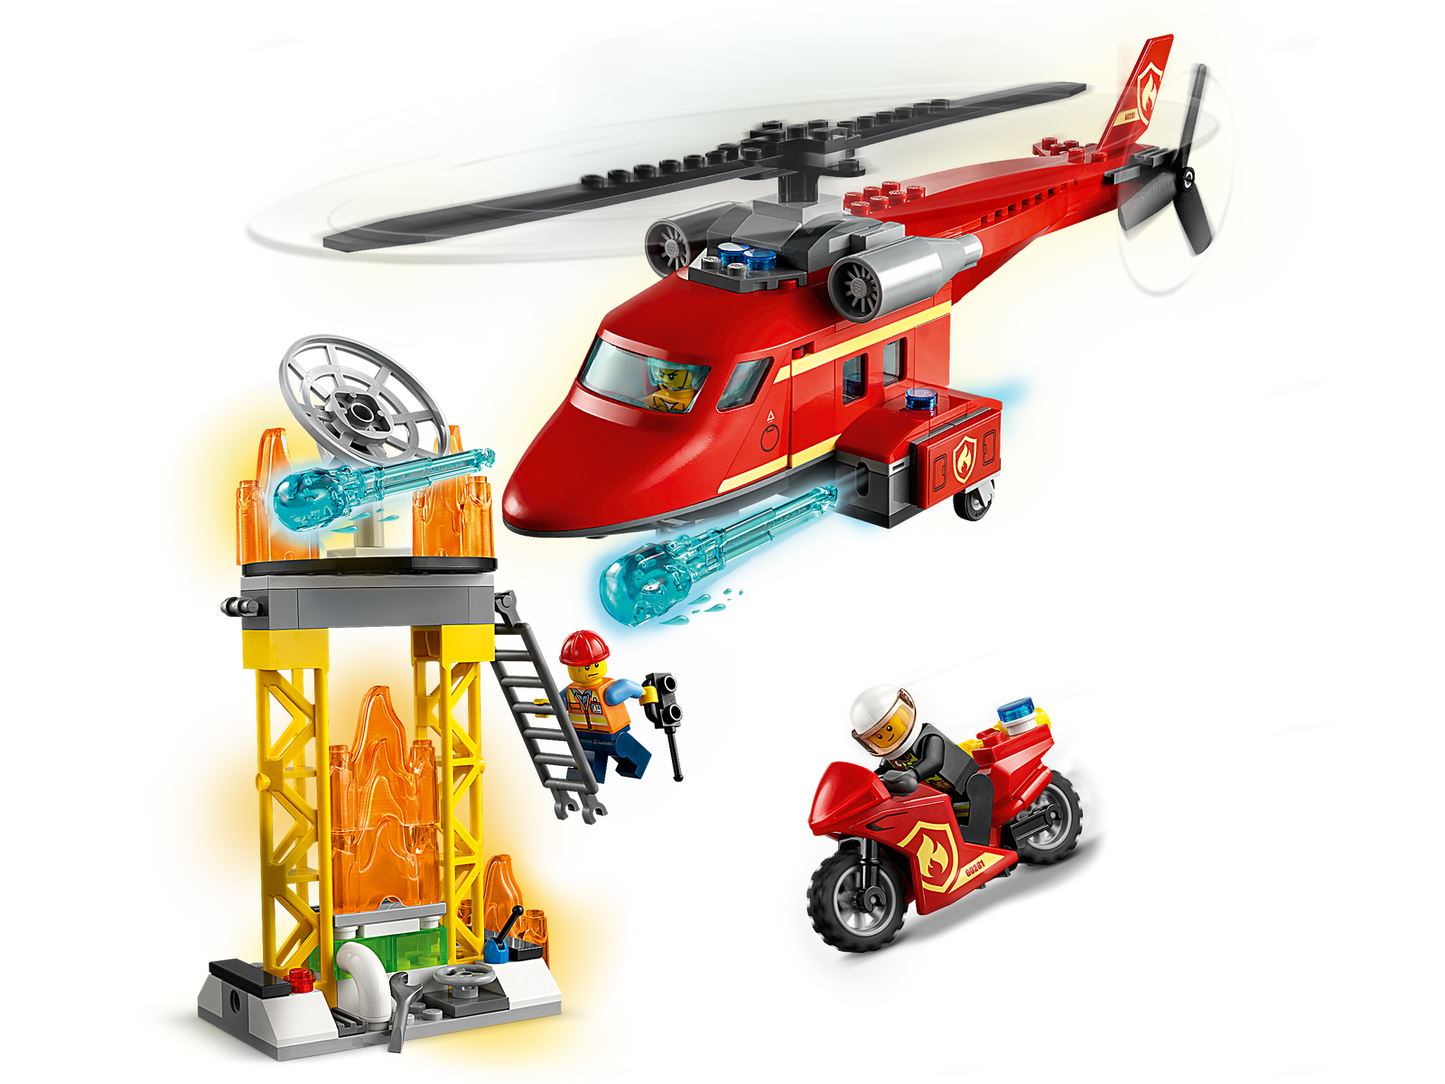 LEGO City Fire Rescue Helicopter 60281